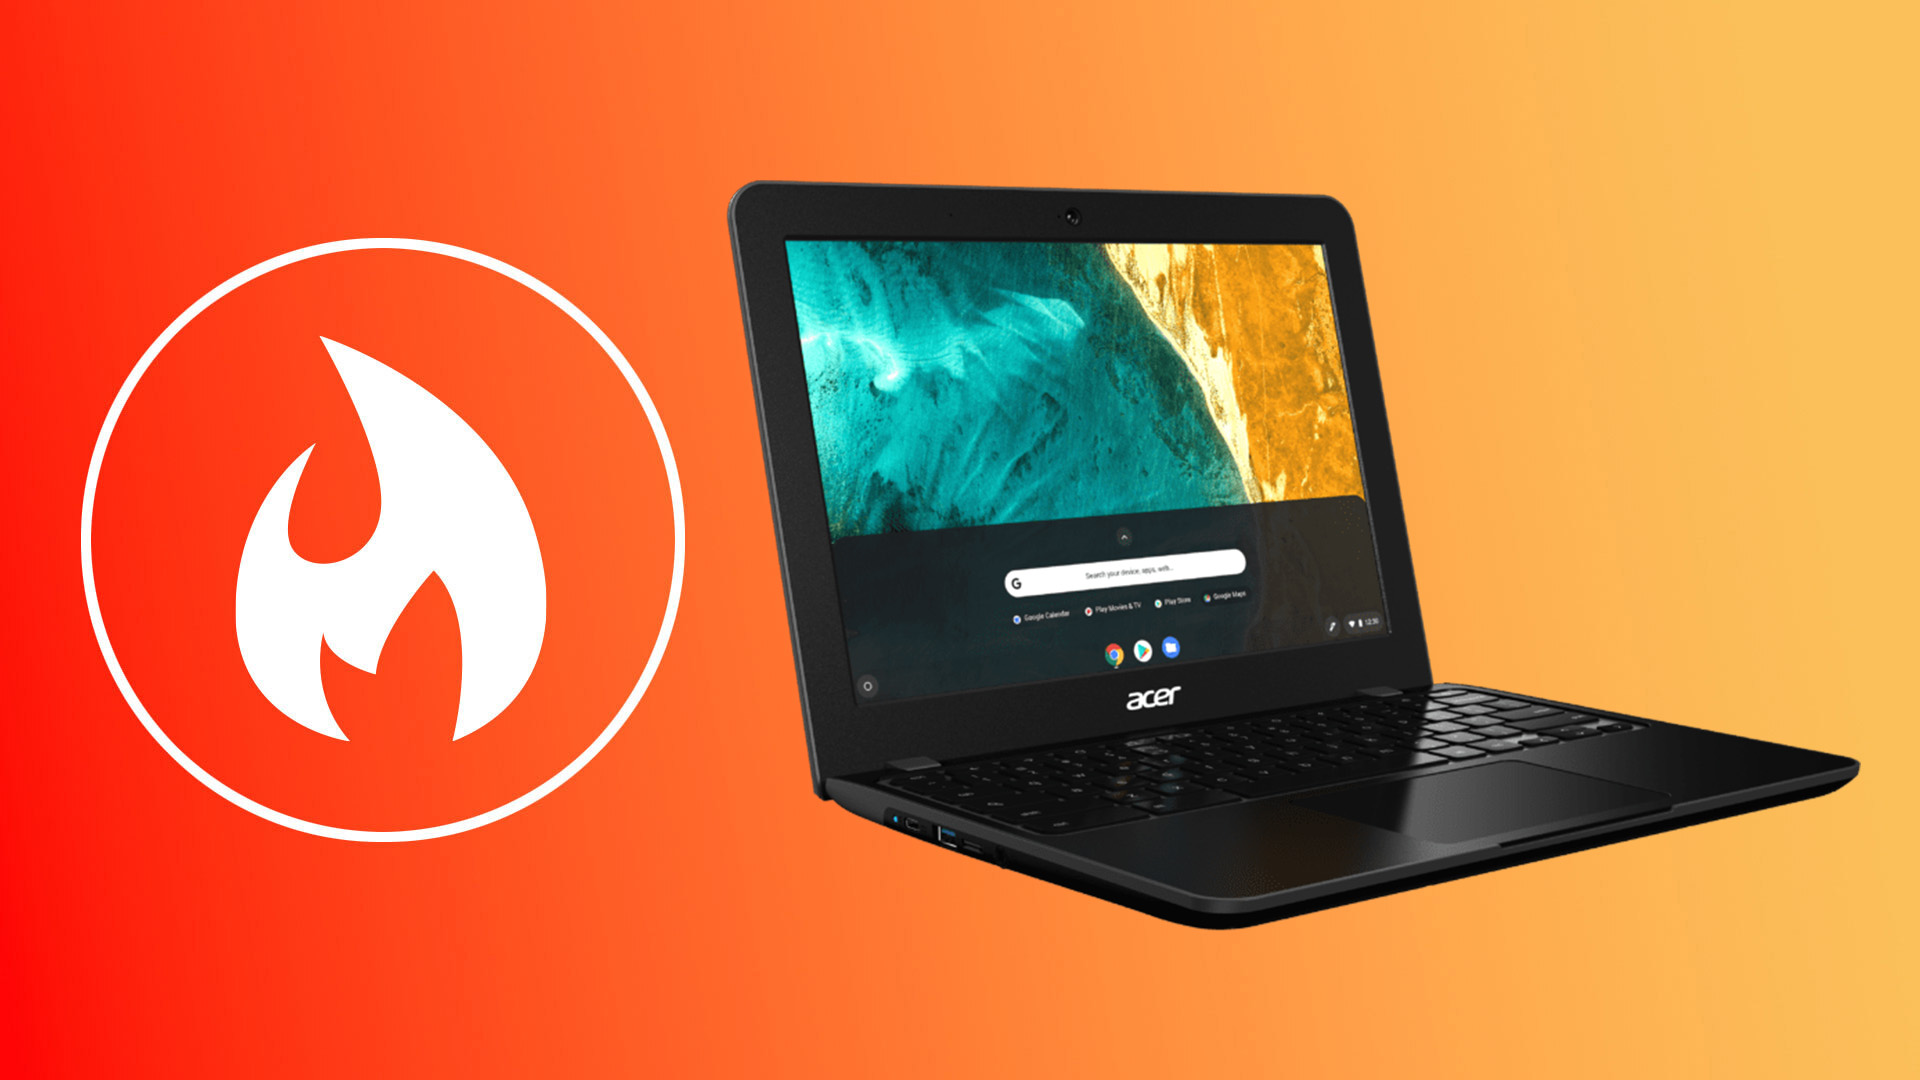 Acer Chromebook 512 next to a flame icon on orange background